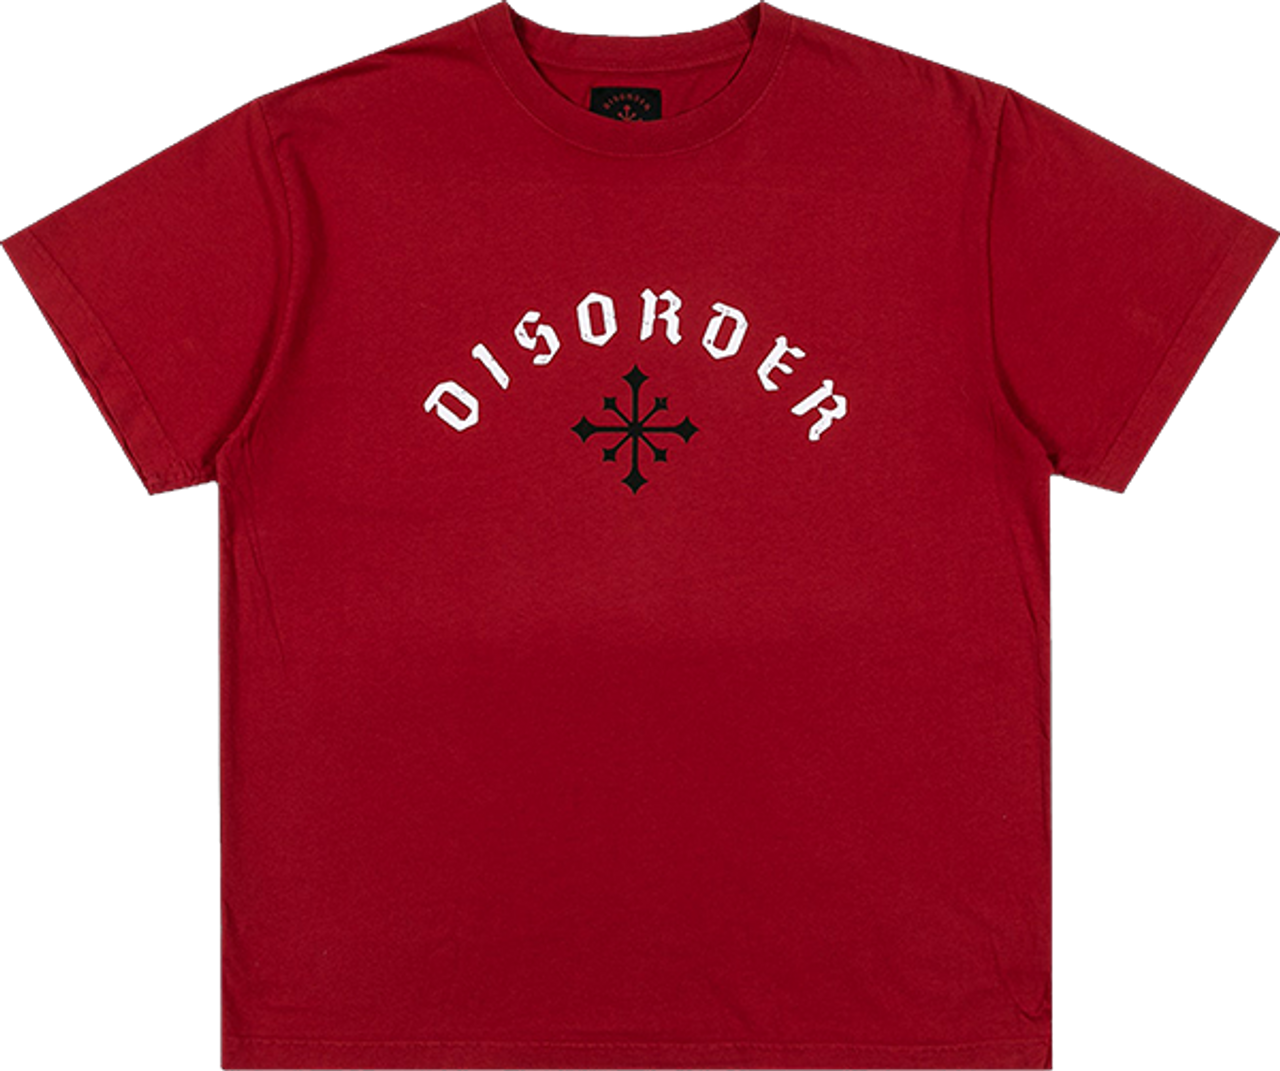 DISORDER ARCH LOGO SS TSHIRT SMALL DISORDER RED